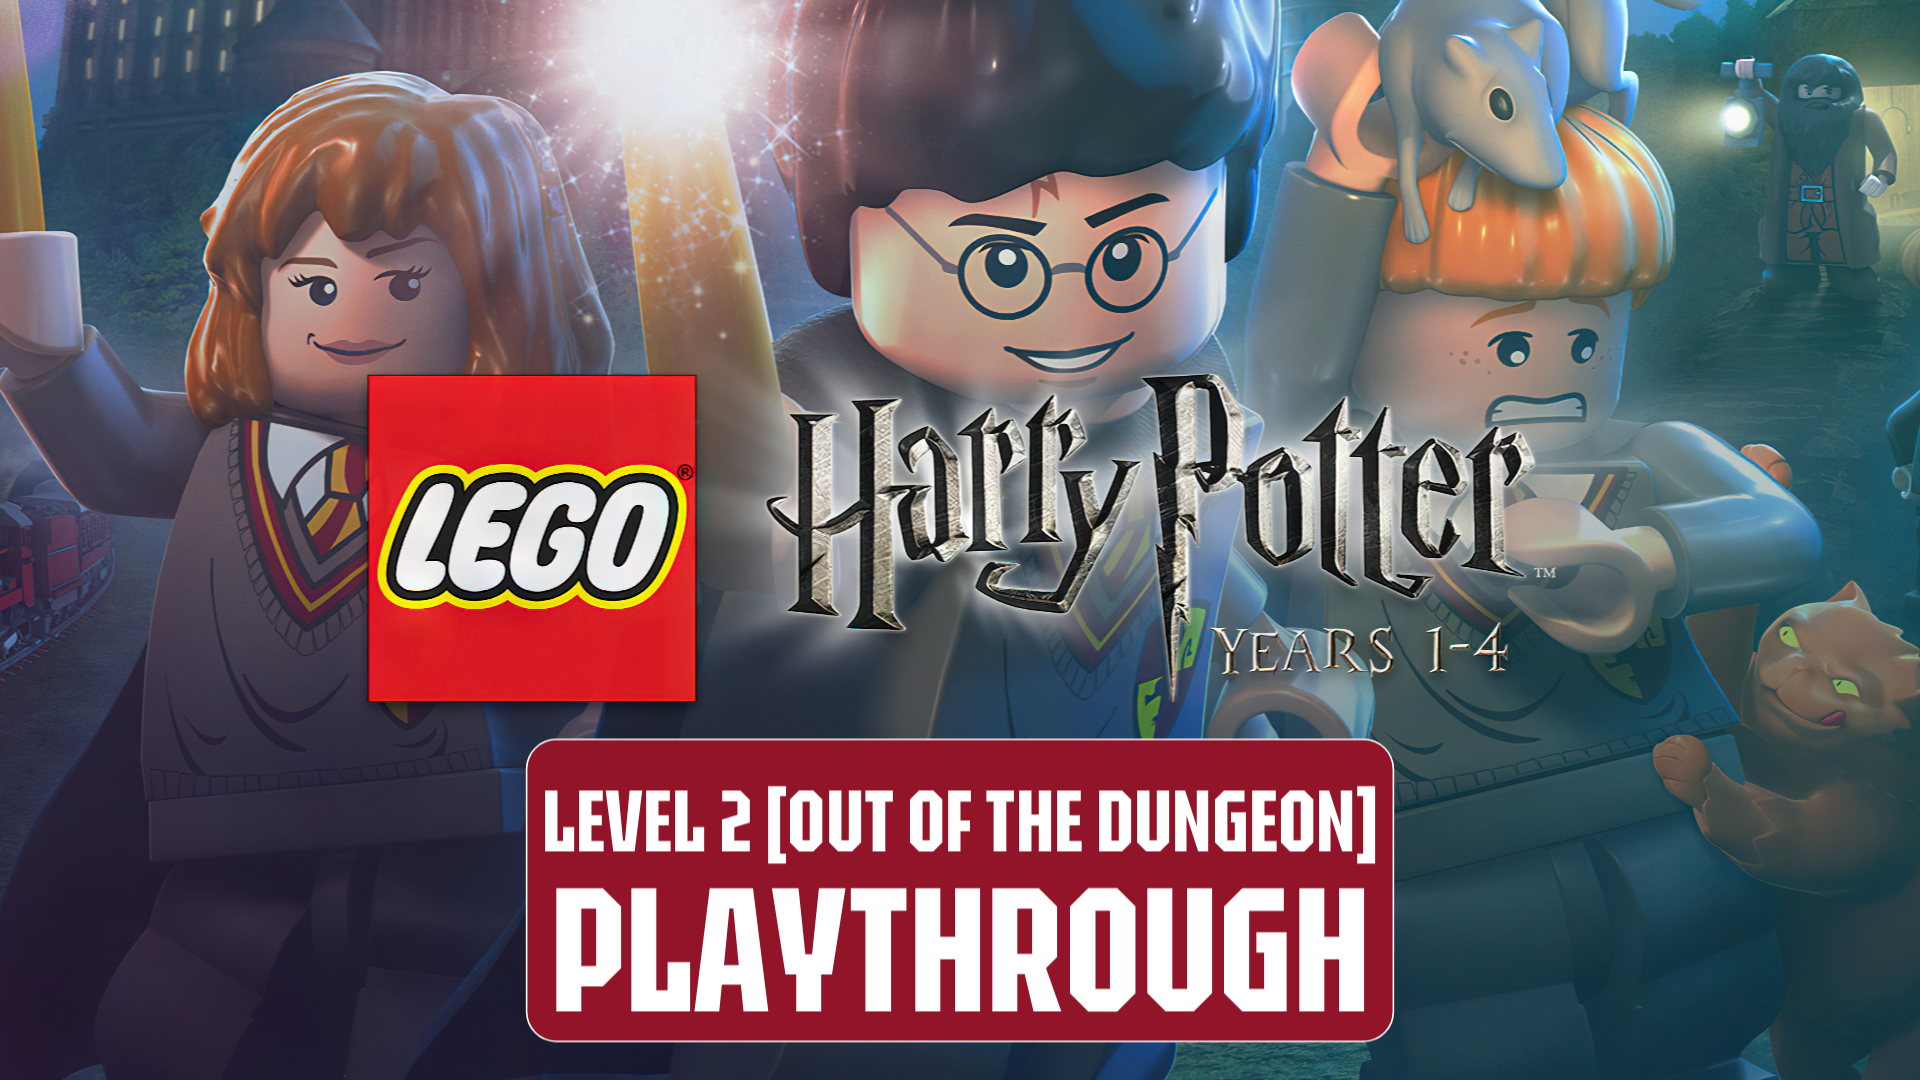 LEGO® HARRY POTTER: YEARS 1-4 | LEVEL 2 PLAYTHROUGH [OUT OF THE DUNGEON] #harrypotter #lego